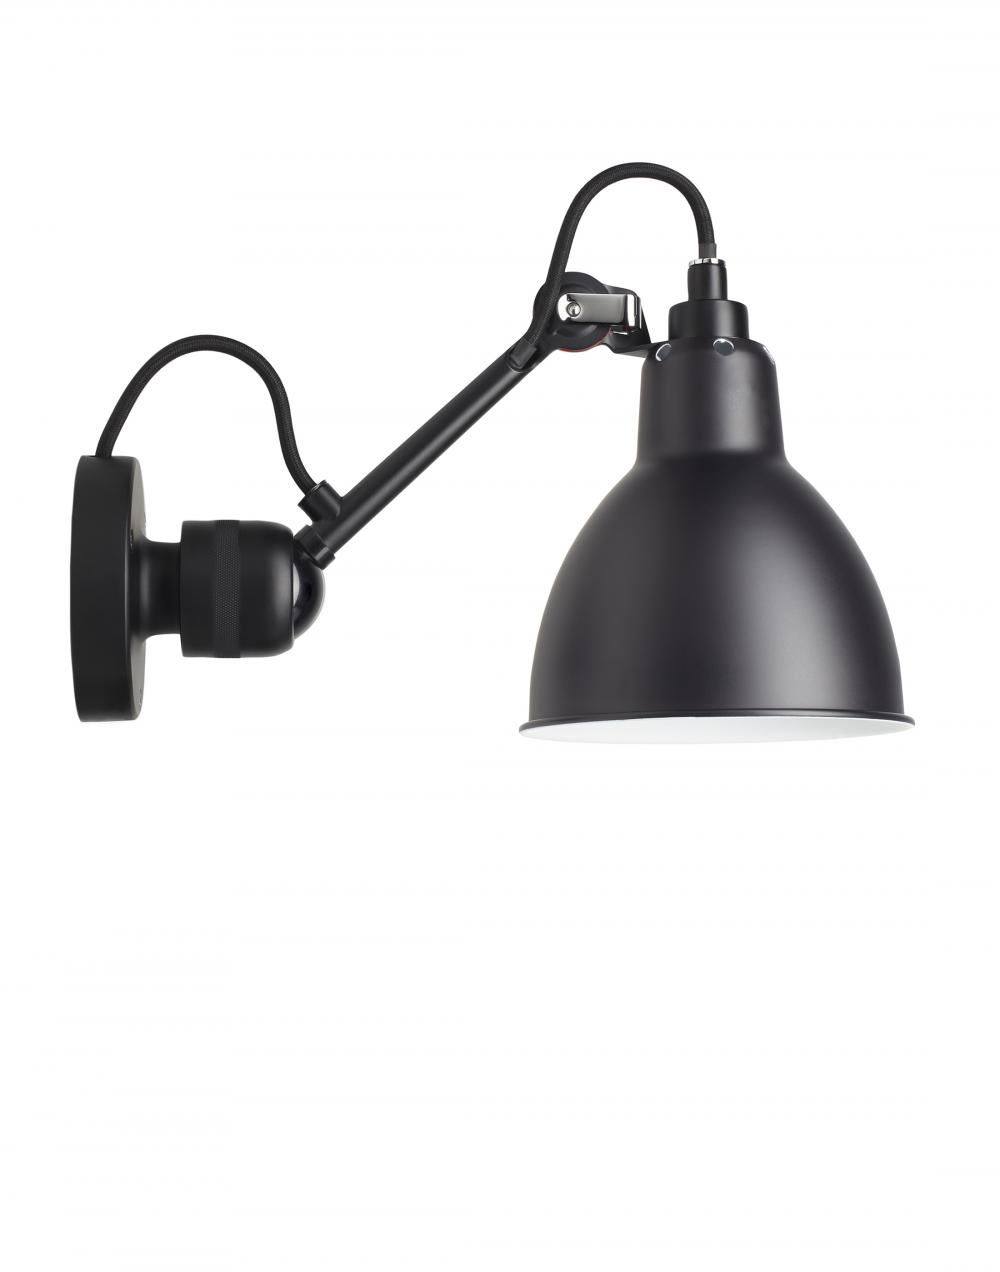 Lampe Gras 304 Small Wall Light Black Arm Black Shade Round Hardwired